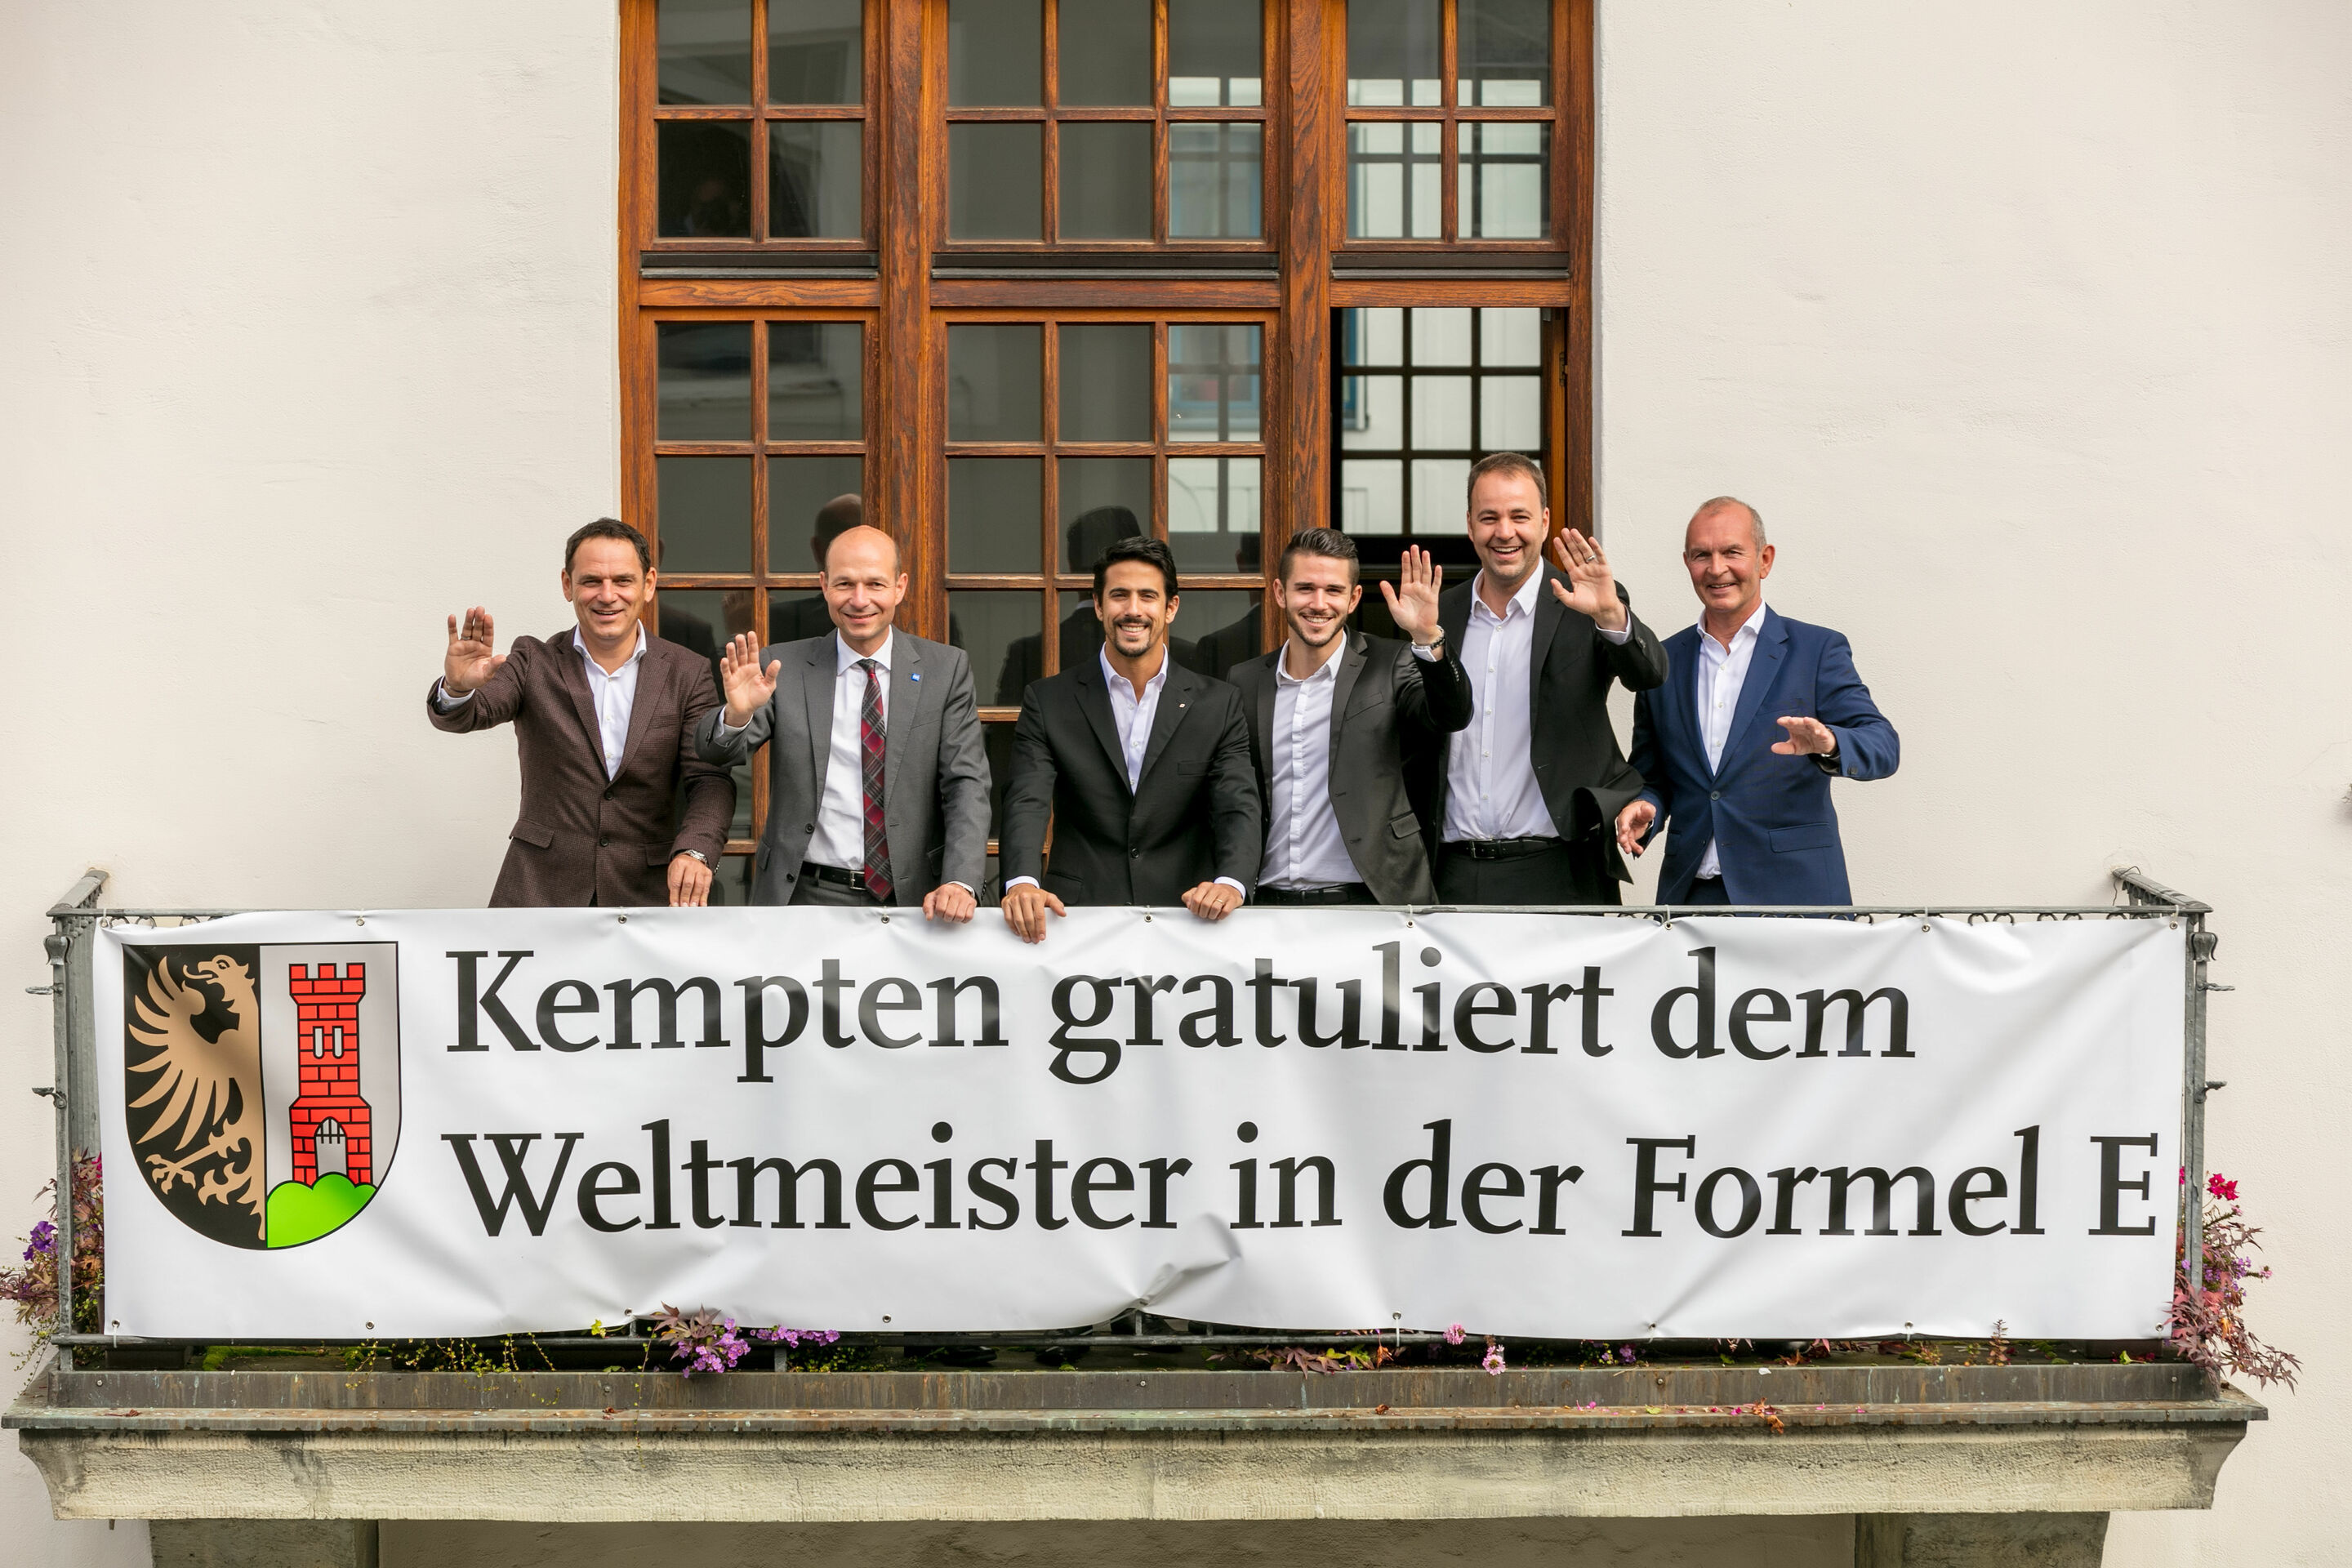 Lucas di Grassi and his team honored by the city of Kempten